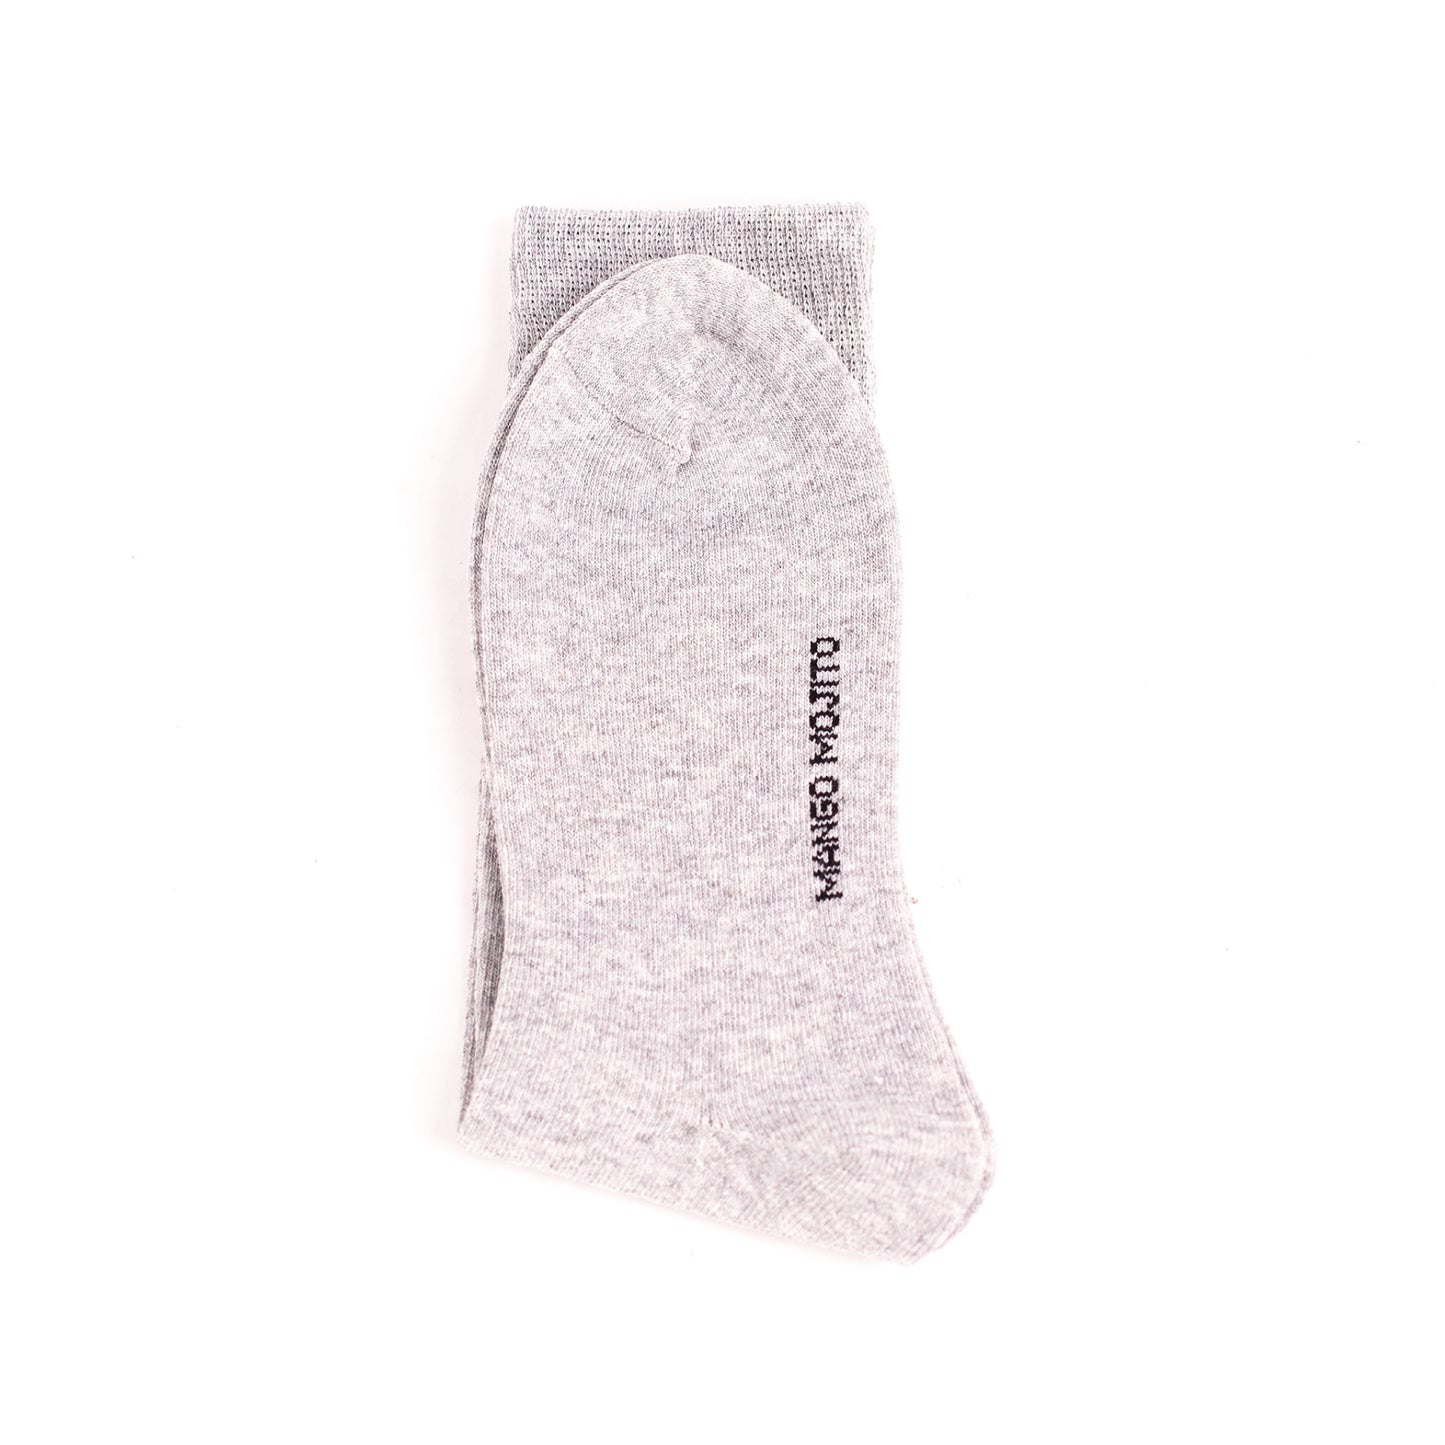 Recycle Socks - Solid Gray